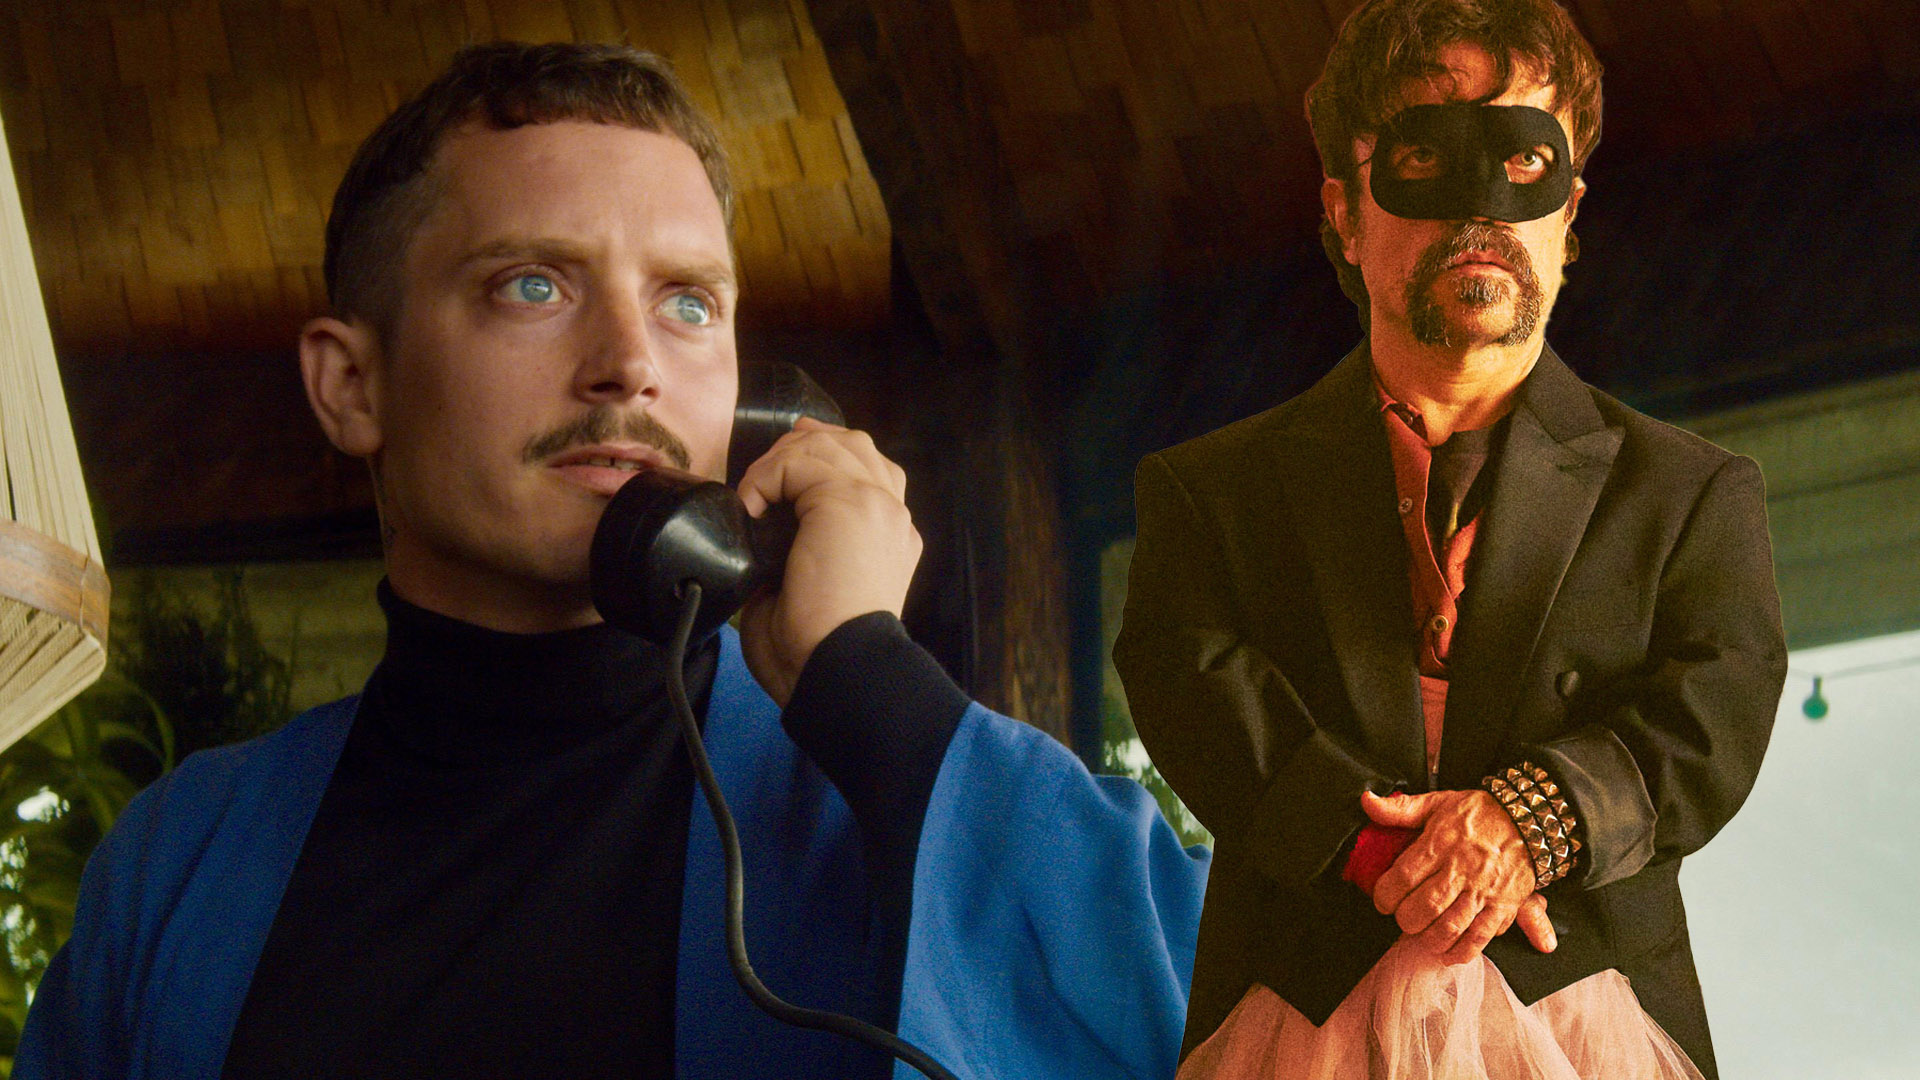 Elijah Wood Unrecognizable (& Downright Creepy) in The Toxic Avenger First Pics